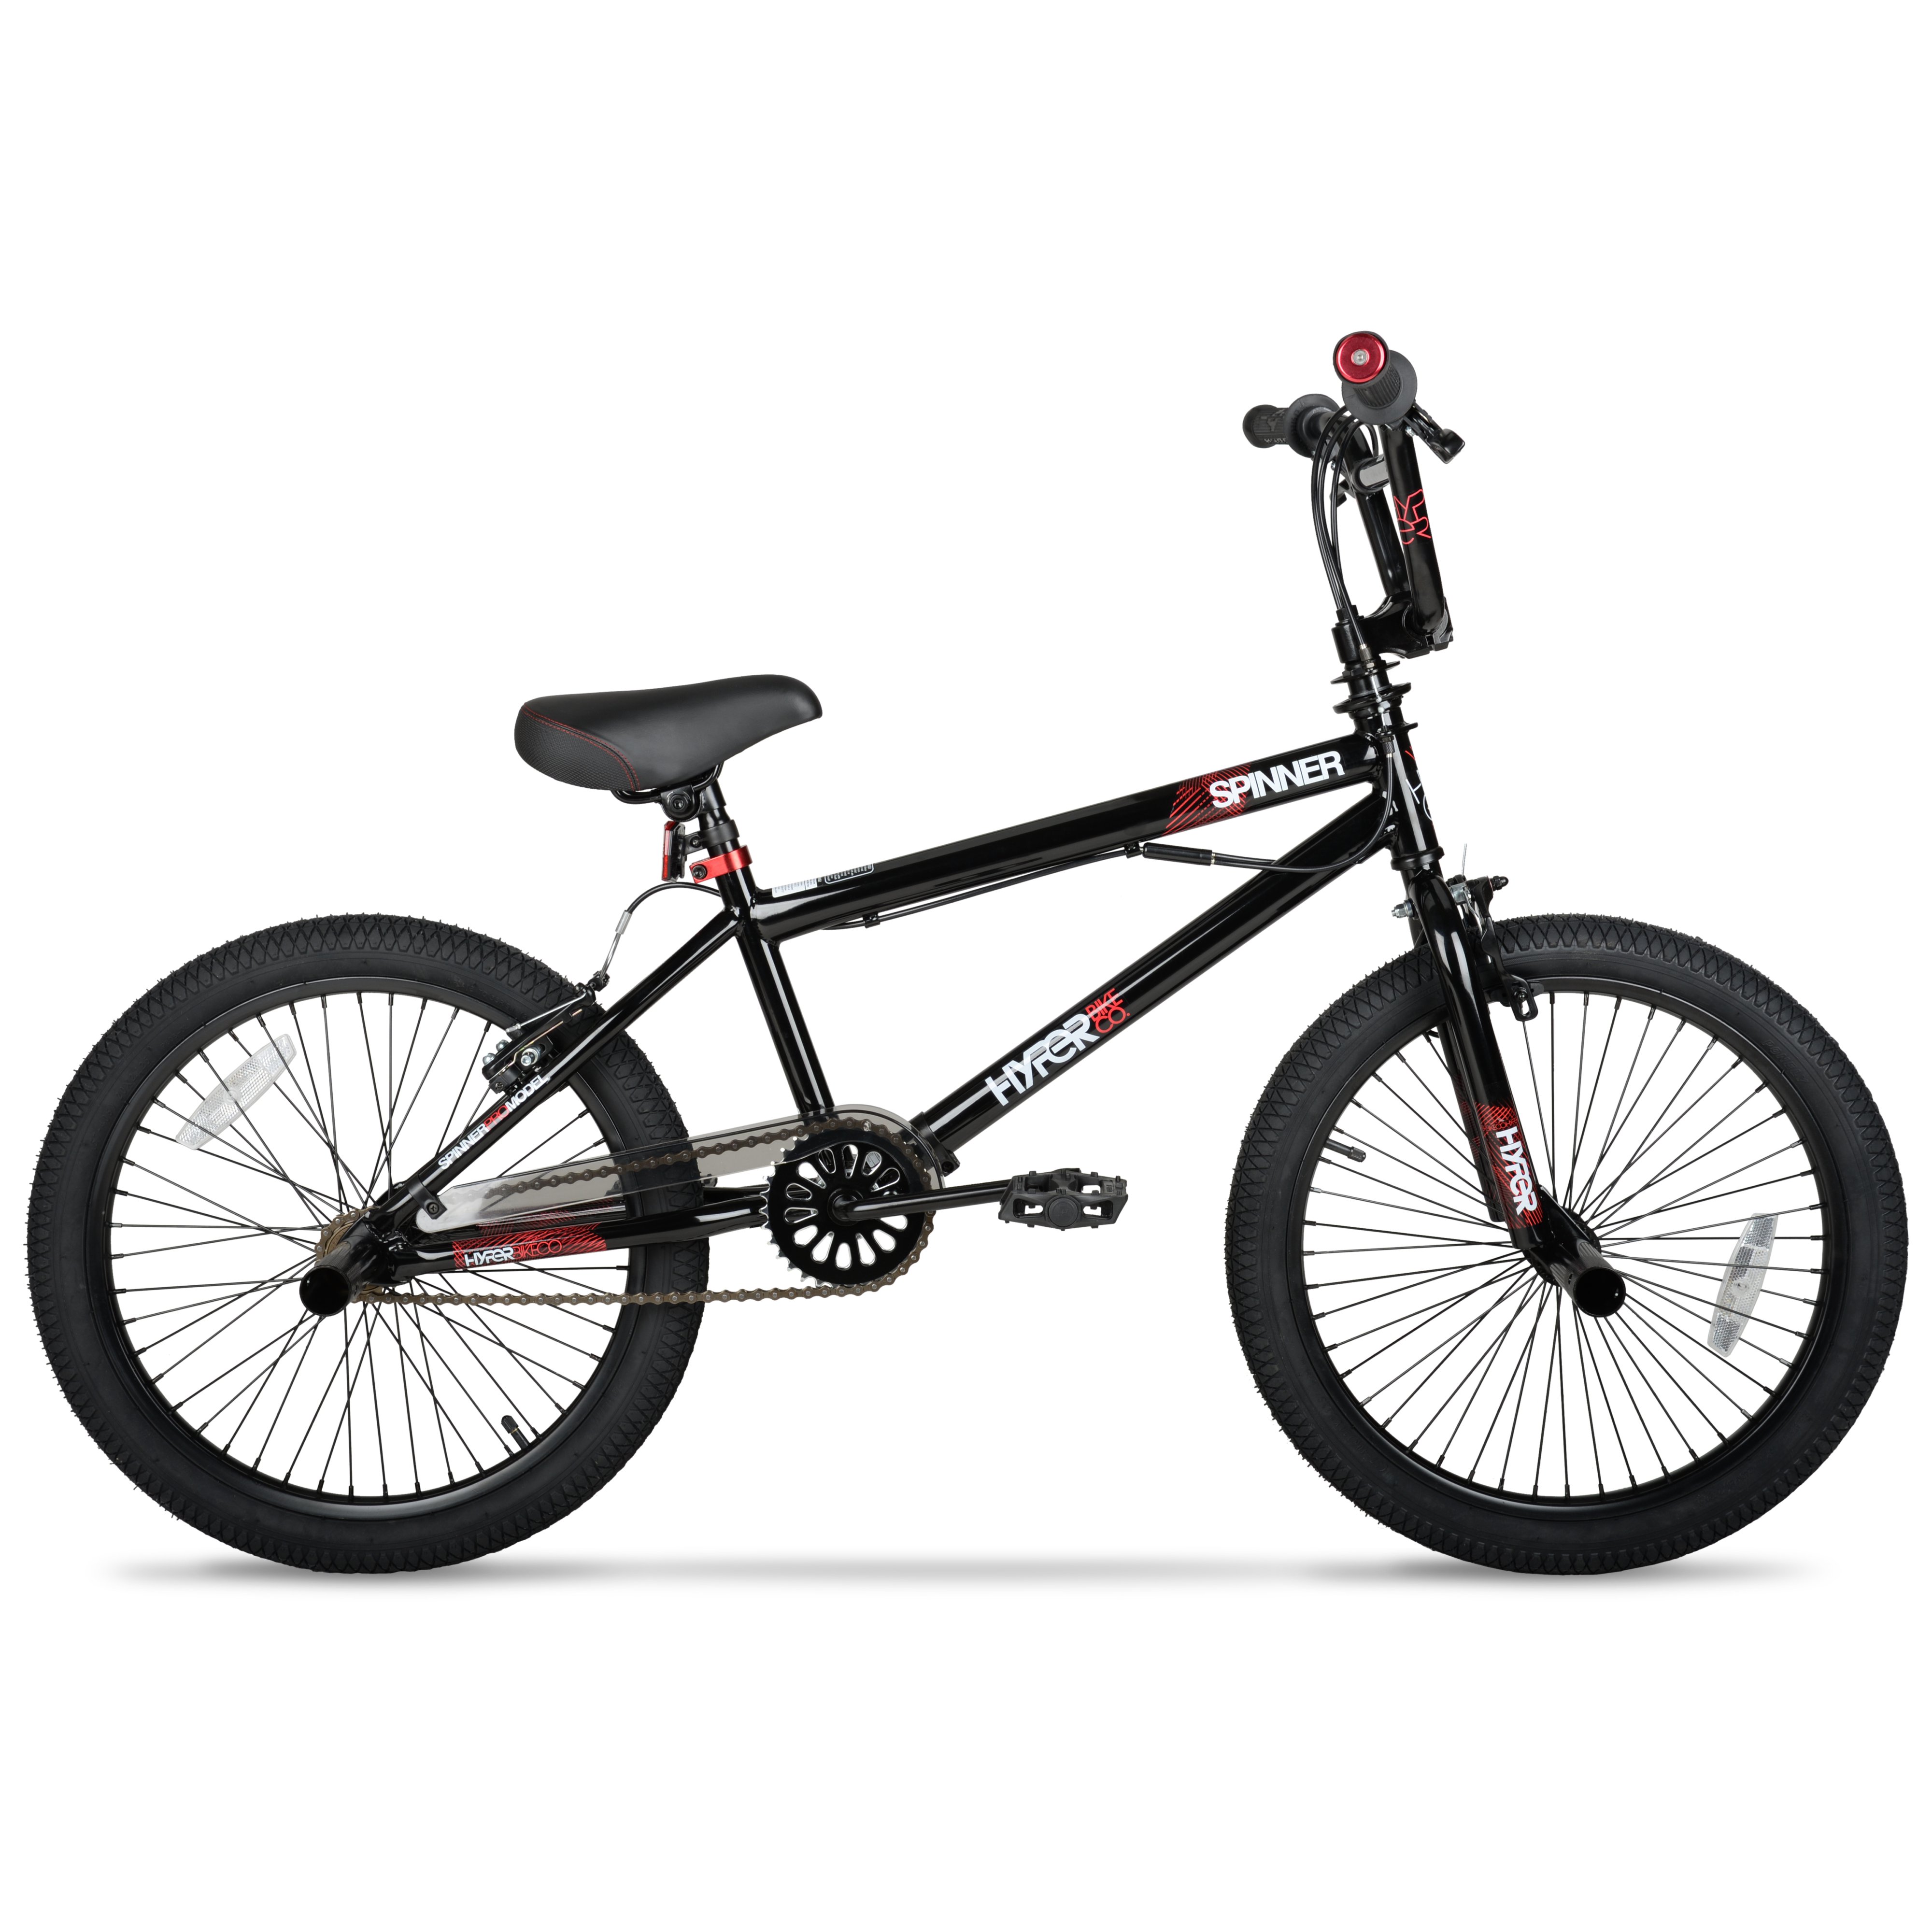 Hyper Bicycles 20" Boy's Spinner BMX Bike for Kids, Black, Recommended Ages Group 8 to 13 Years Old - image 1 of 12